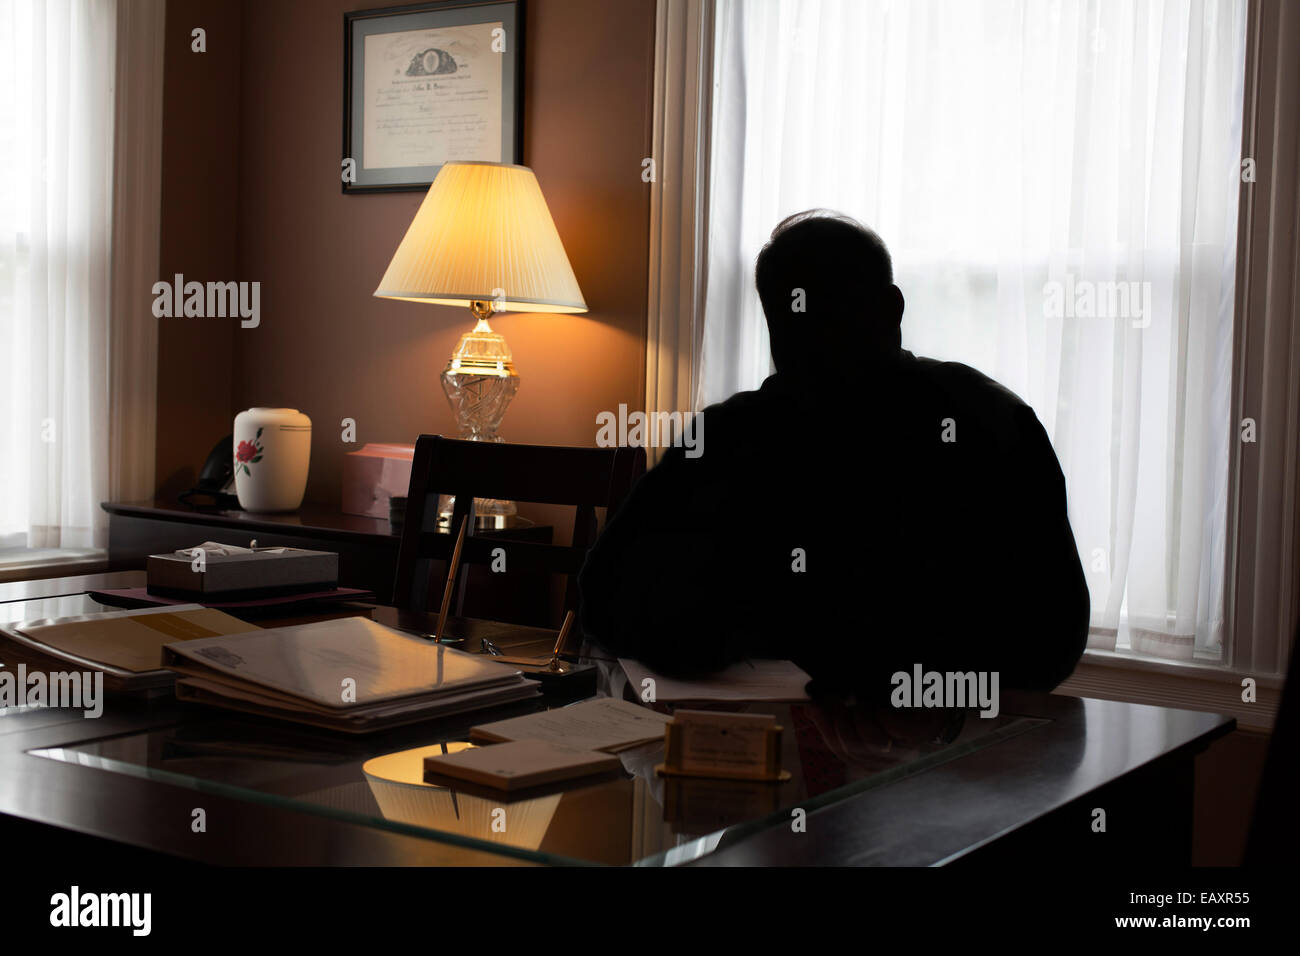 Silhouette of business man at his desk in small office. Stock Photo